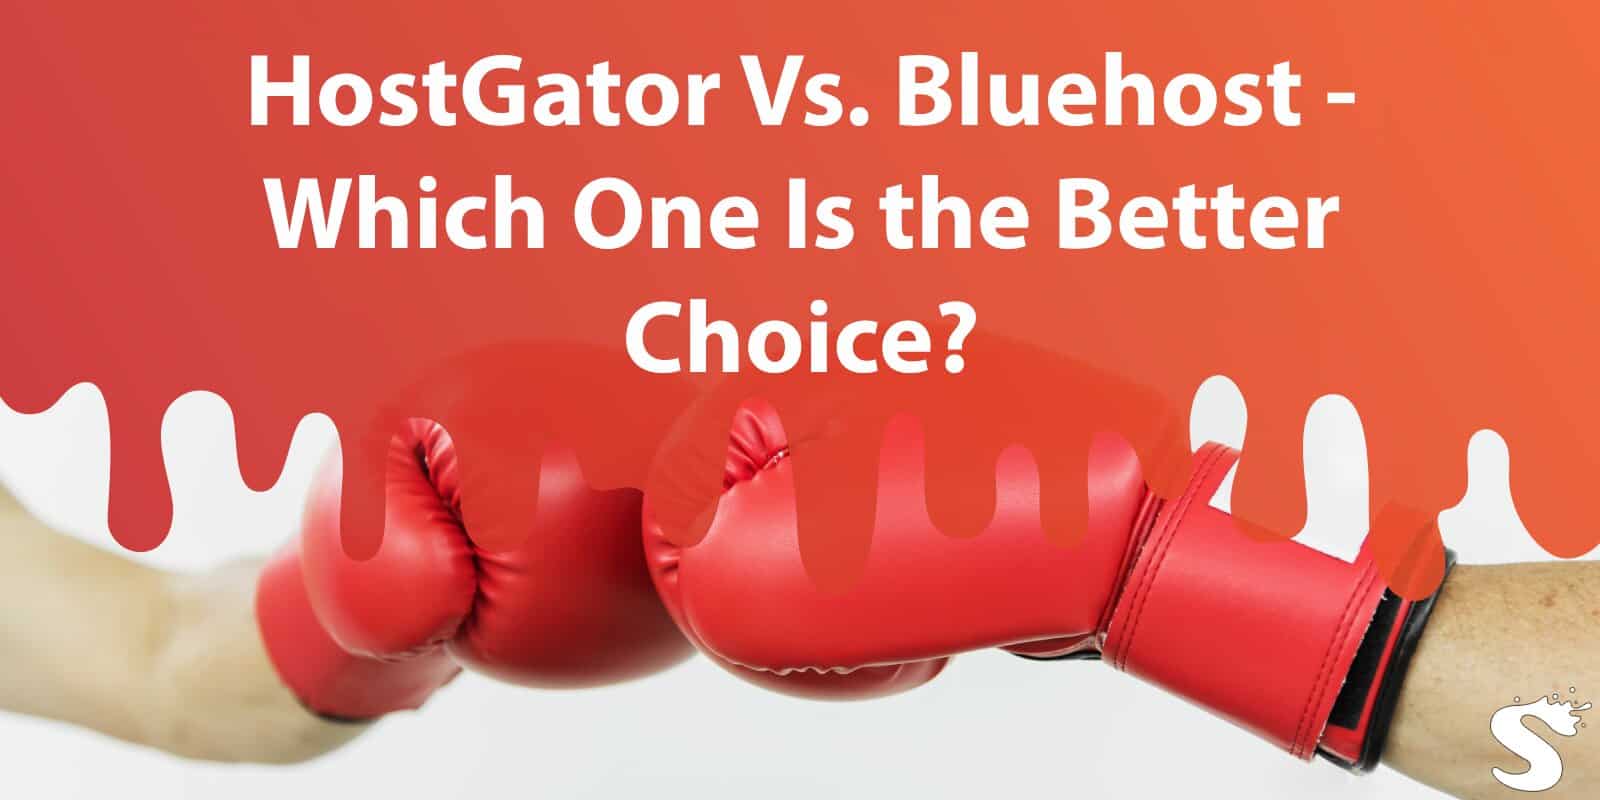 HostGator Vs. Bluehost - Which One Is the Better Choice?